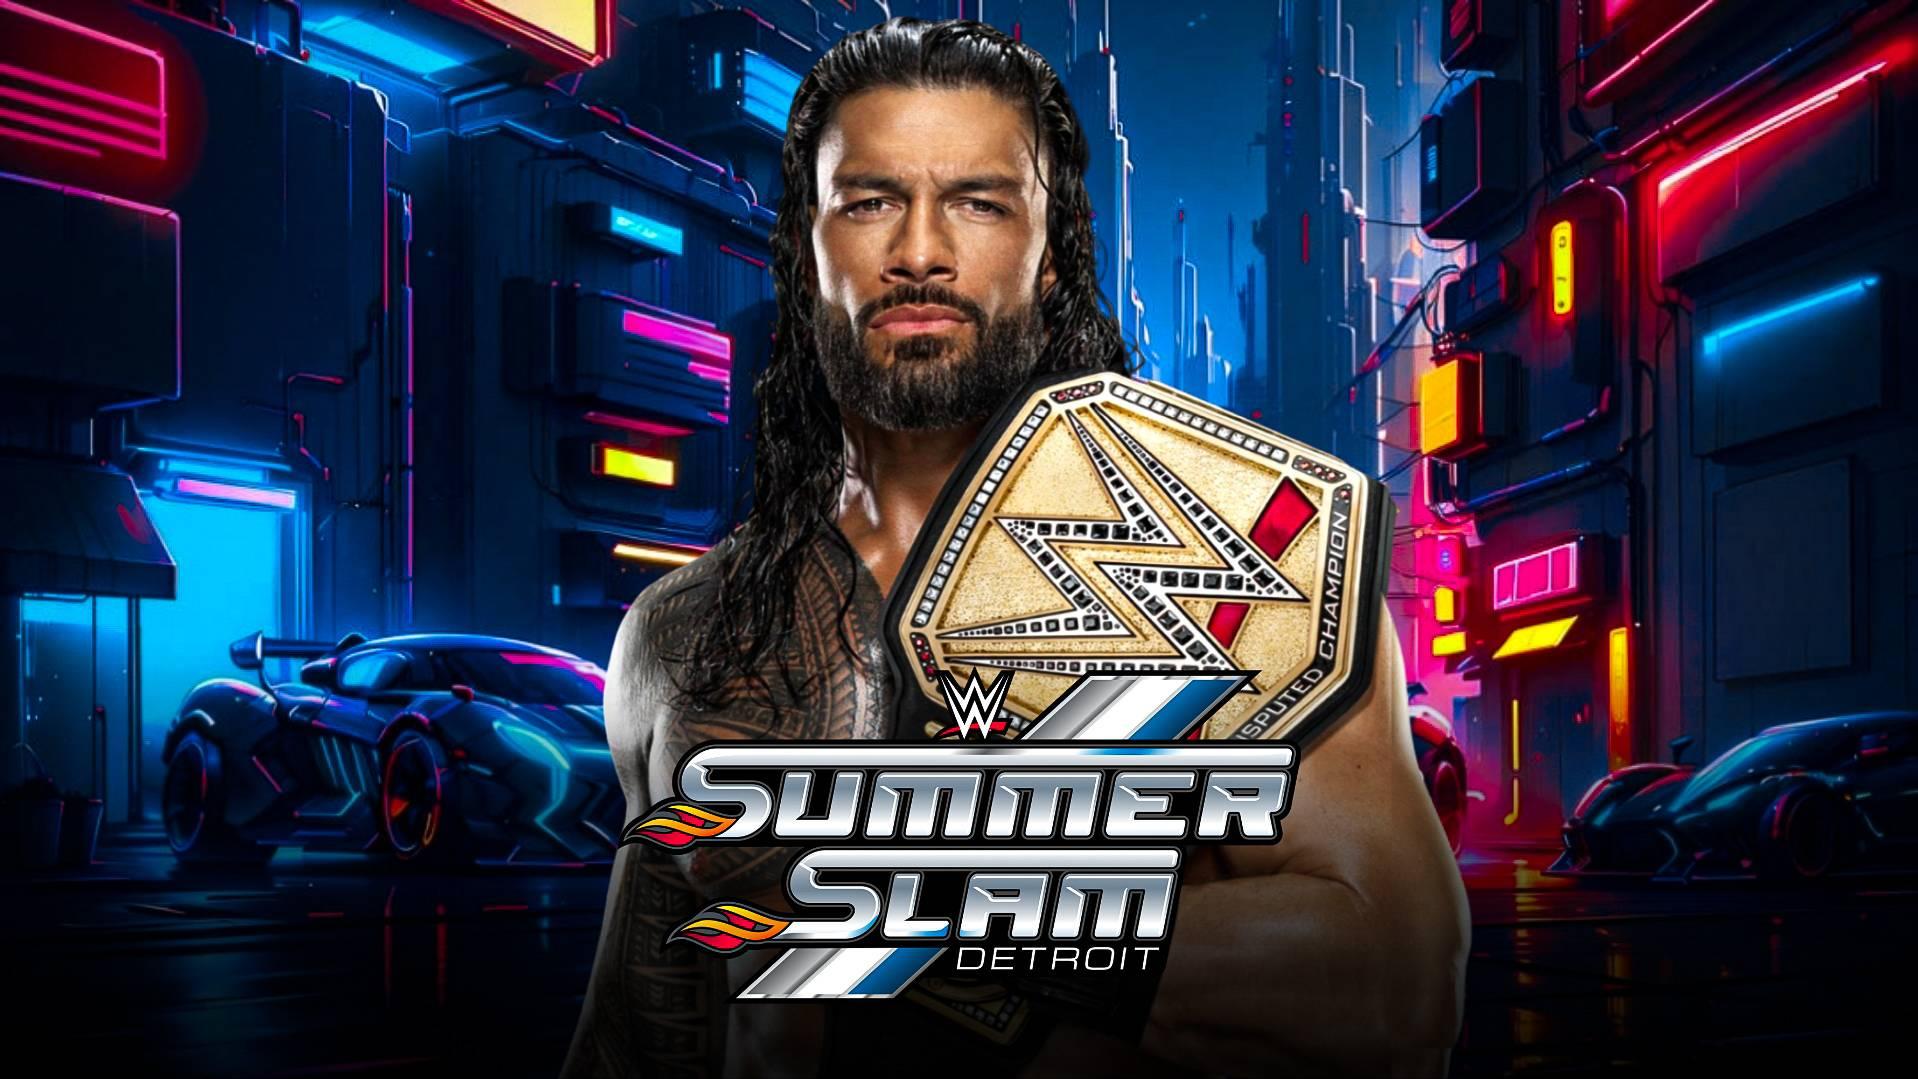 Wwe Summerslam Poster By Rolex Wrestling Rolexdesigns On